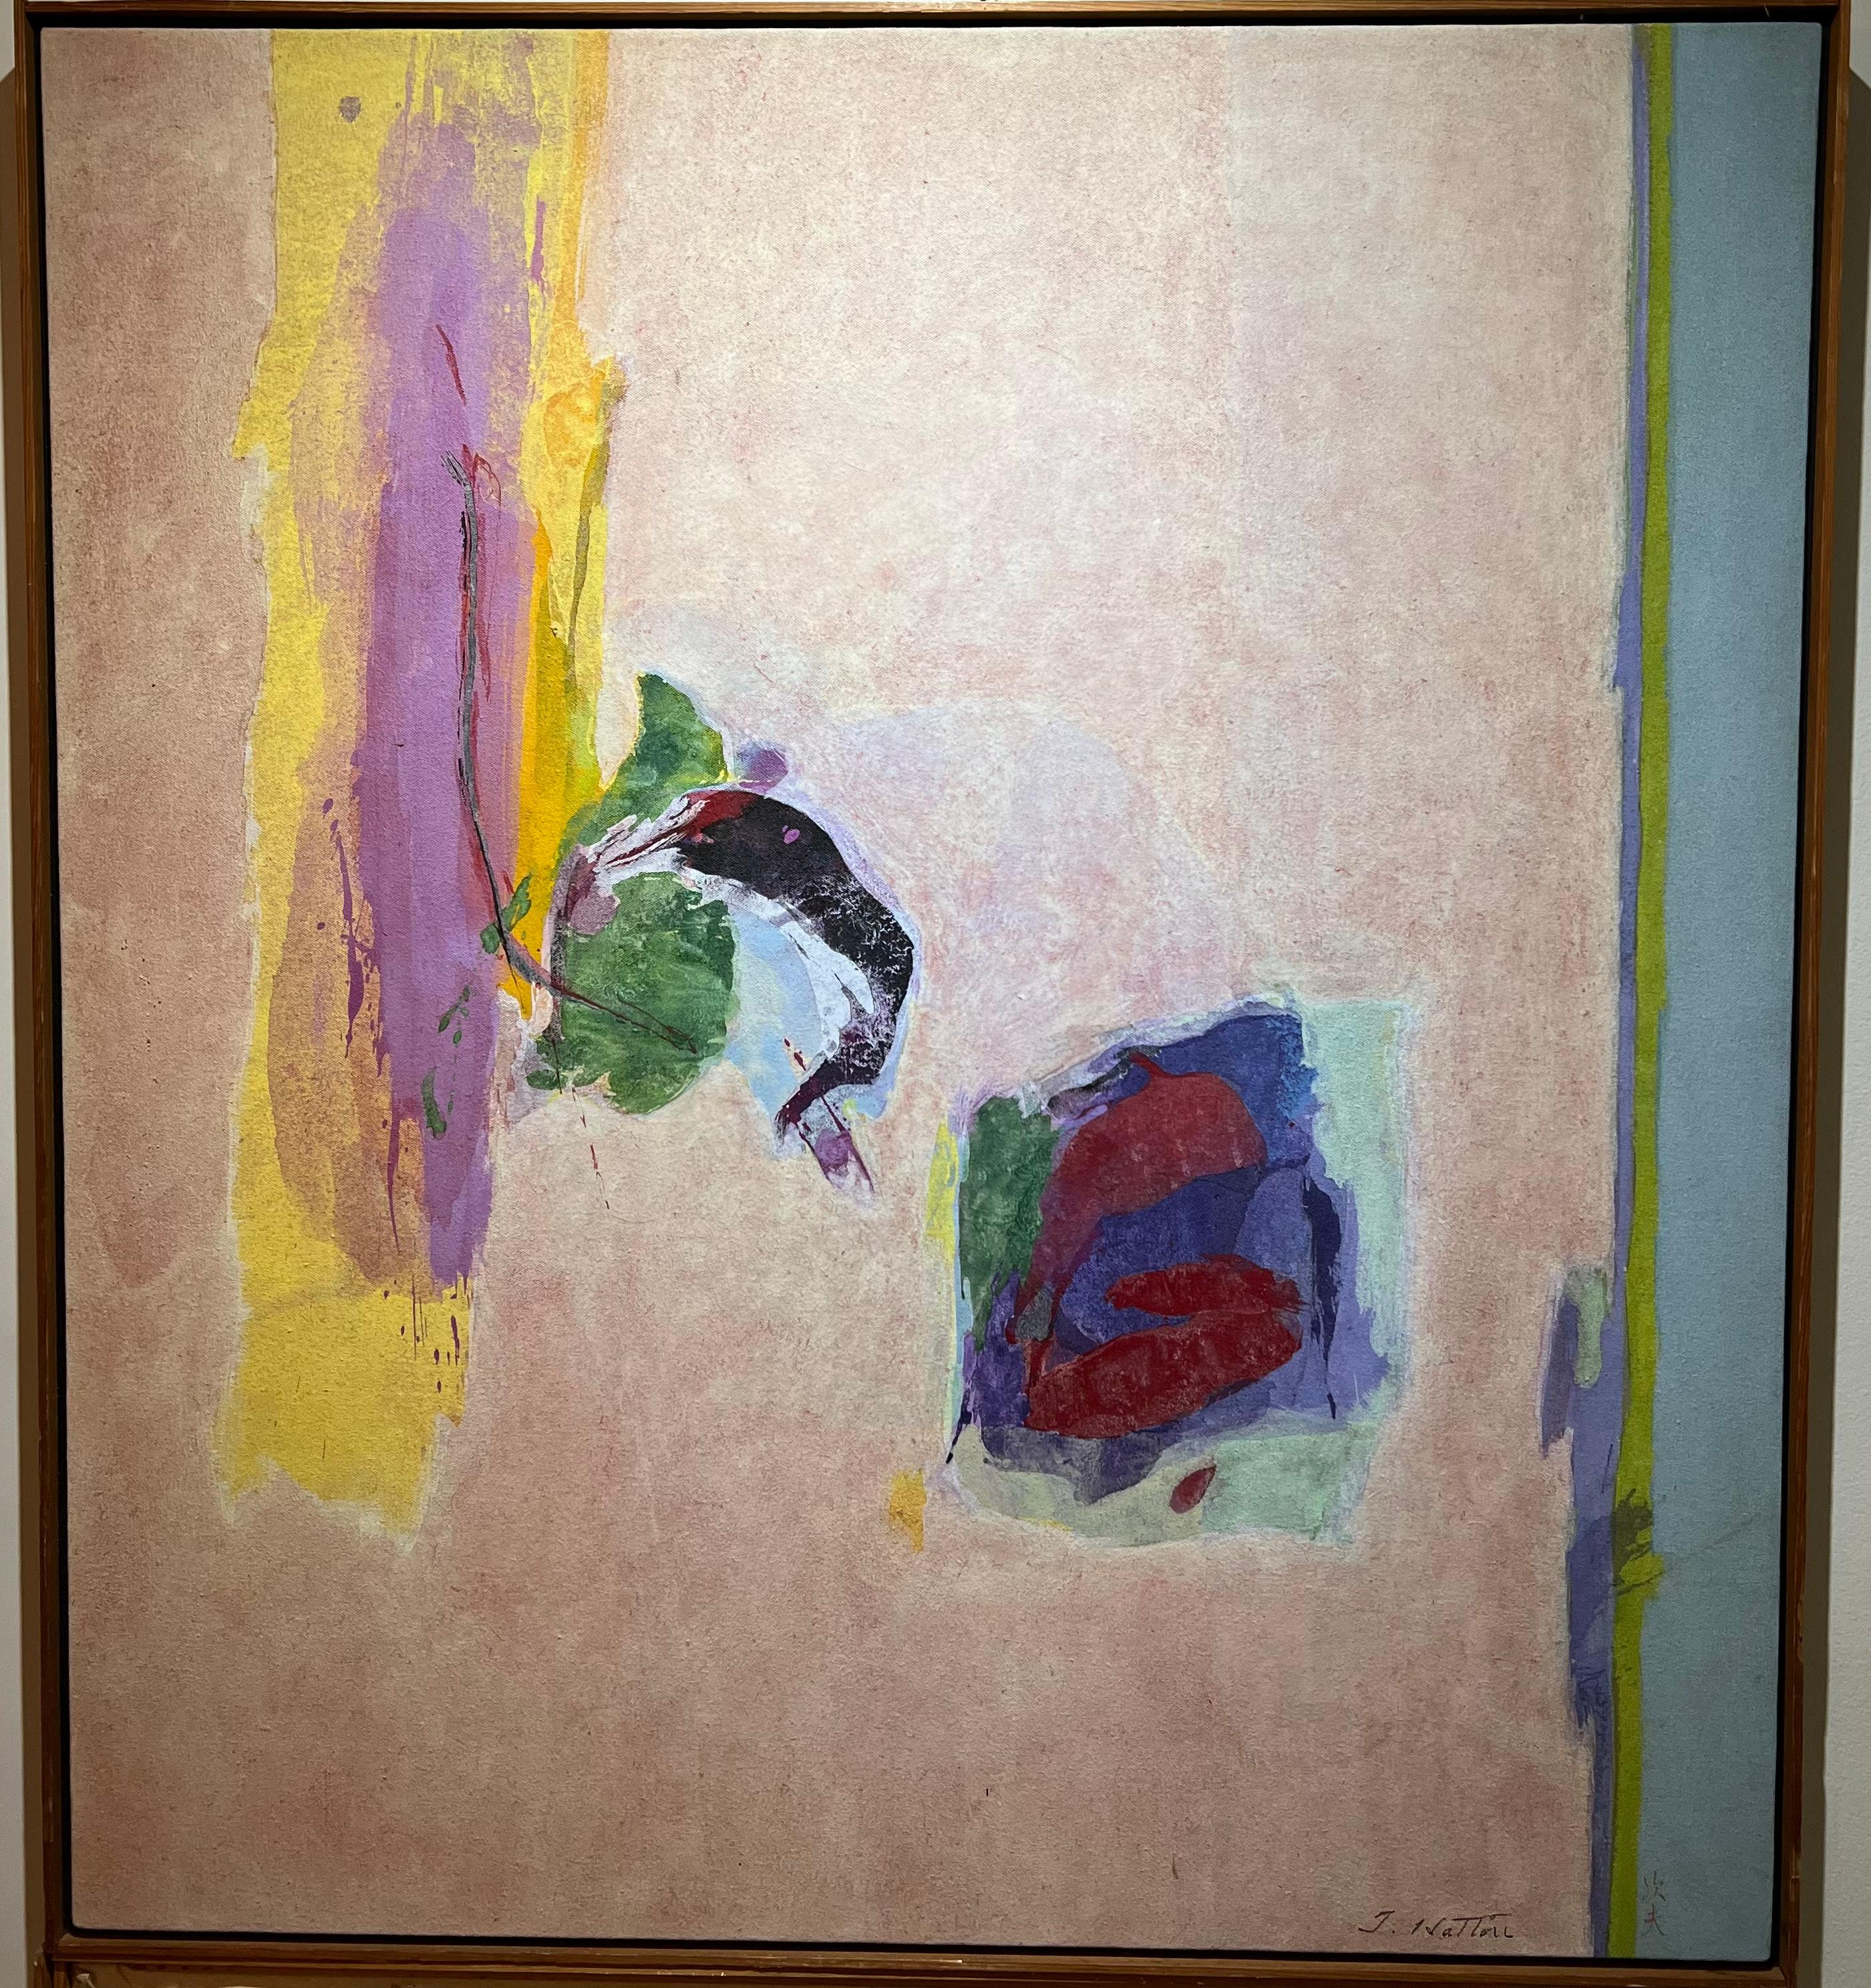 Here we have two gorgeous colorful paintings by Tsugio Hattori (1952-1958), selling them separately.  

Tsugio Hattori is an American/Japanese Abstract painter who exhibited many important shows, museums and galleries.  

Painting depicts a